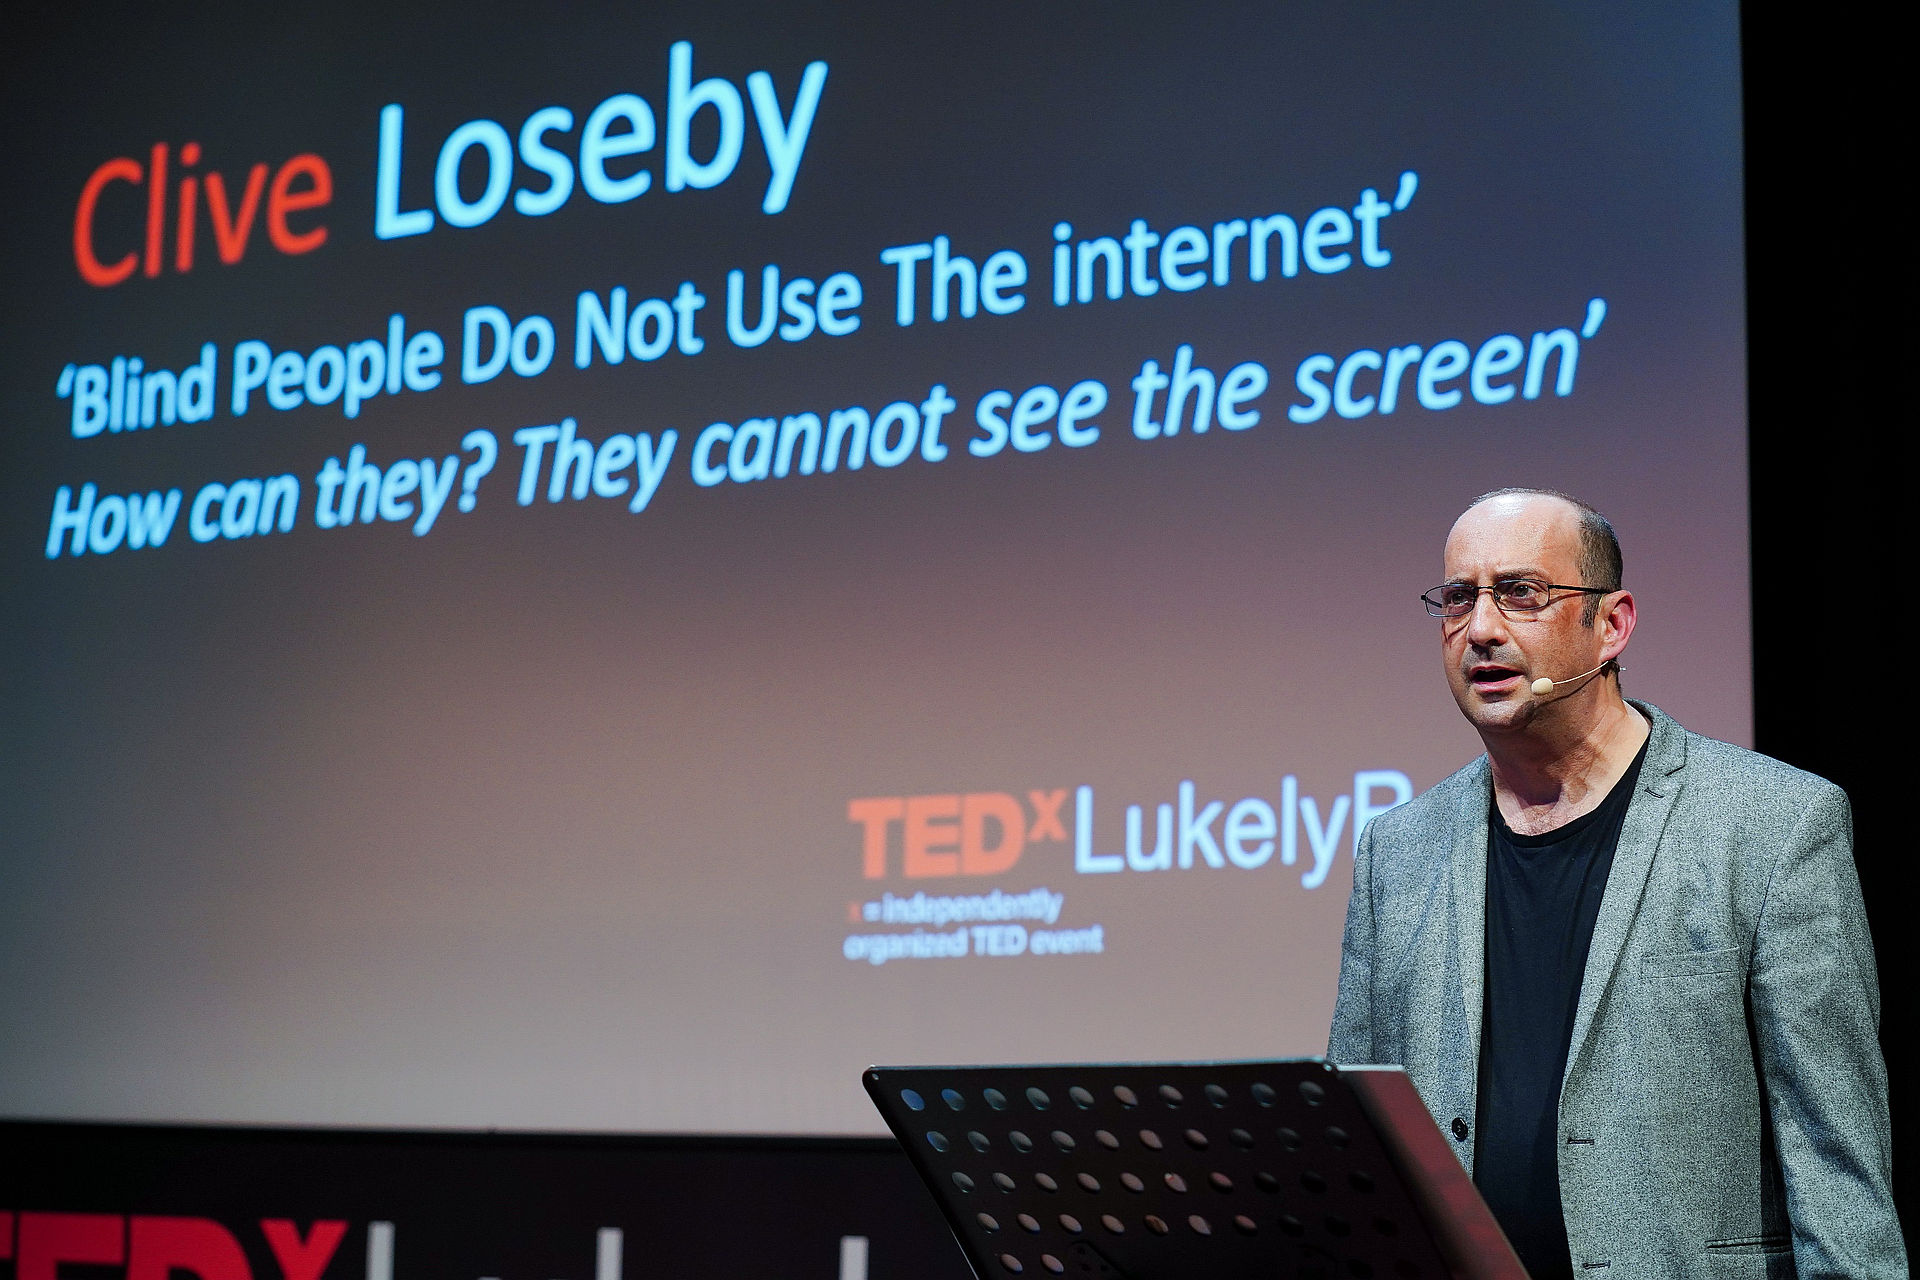 Clive giving his Ted Talk. Behind him, a screen says "Blind People do not use the Internet. How can they? They cannot see the screen"